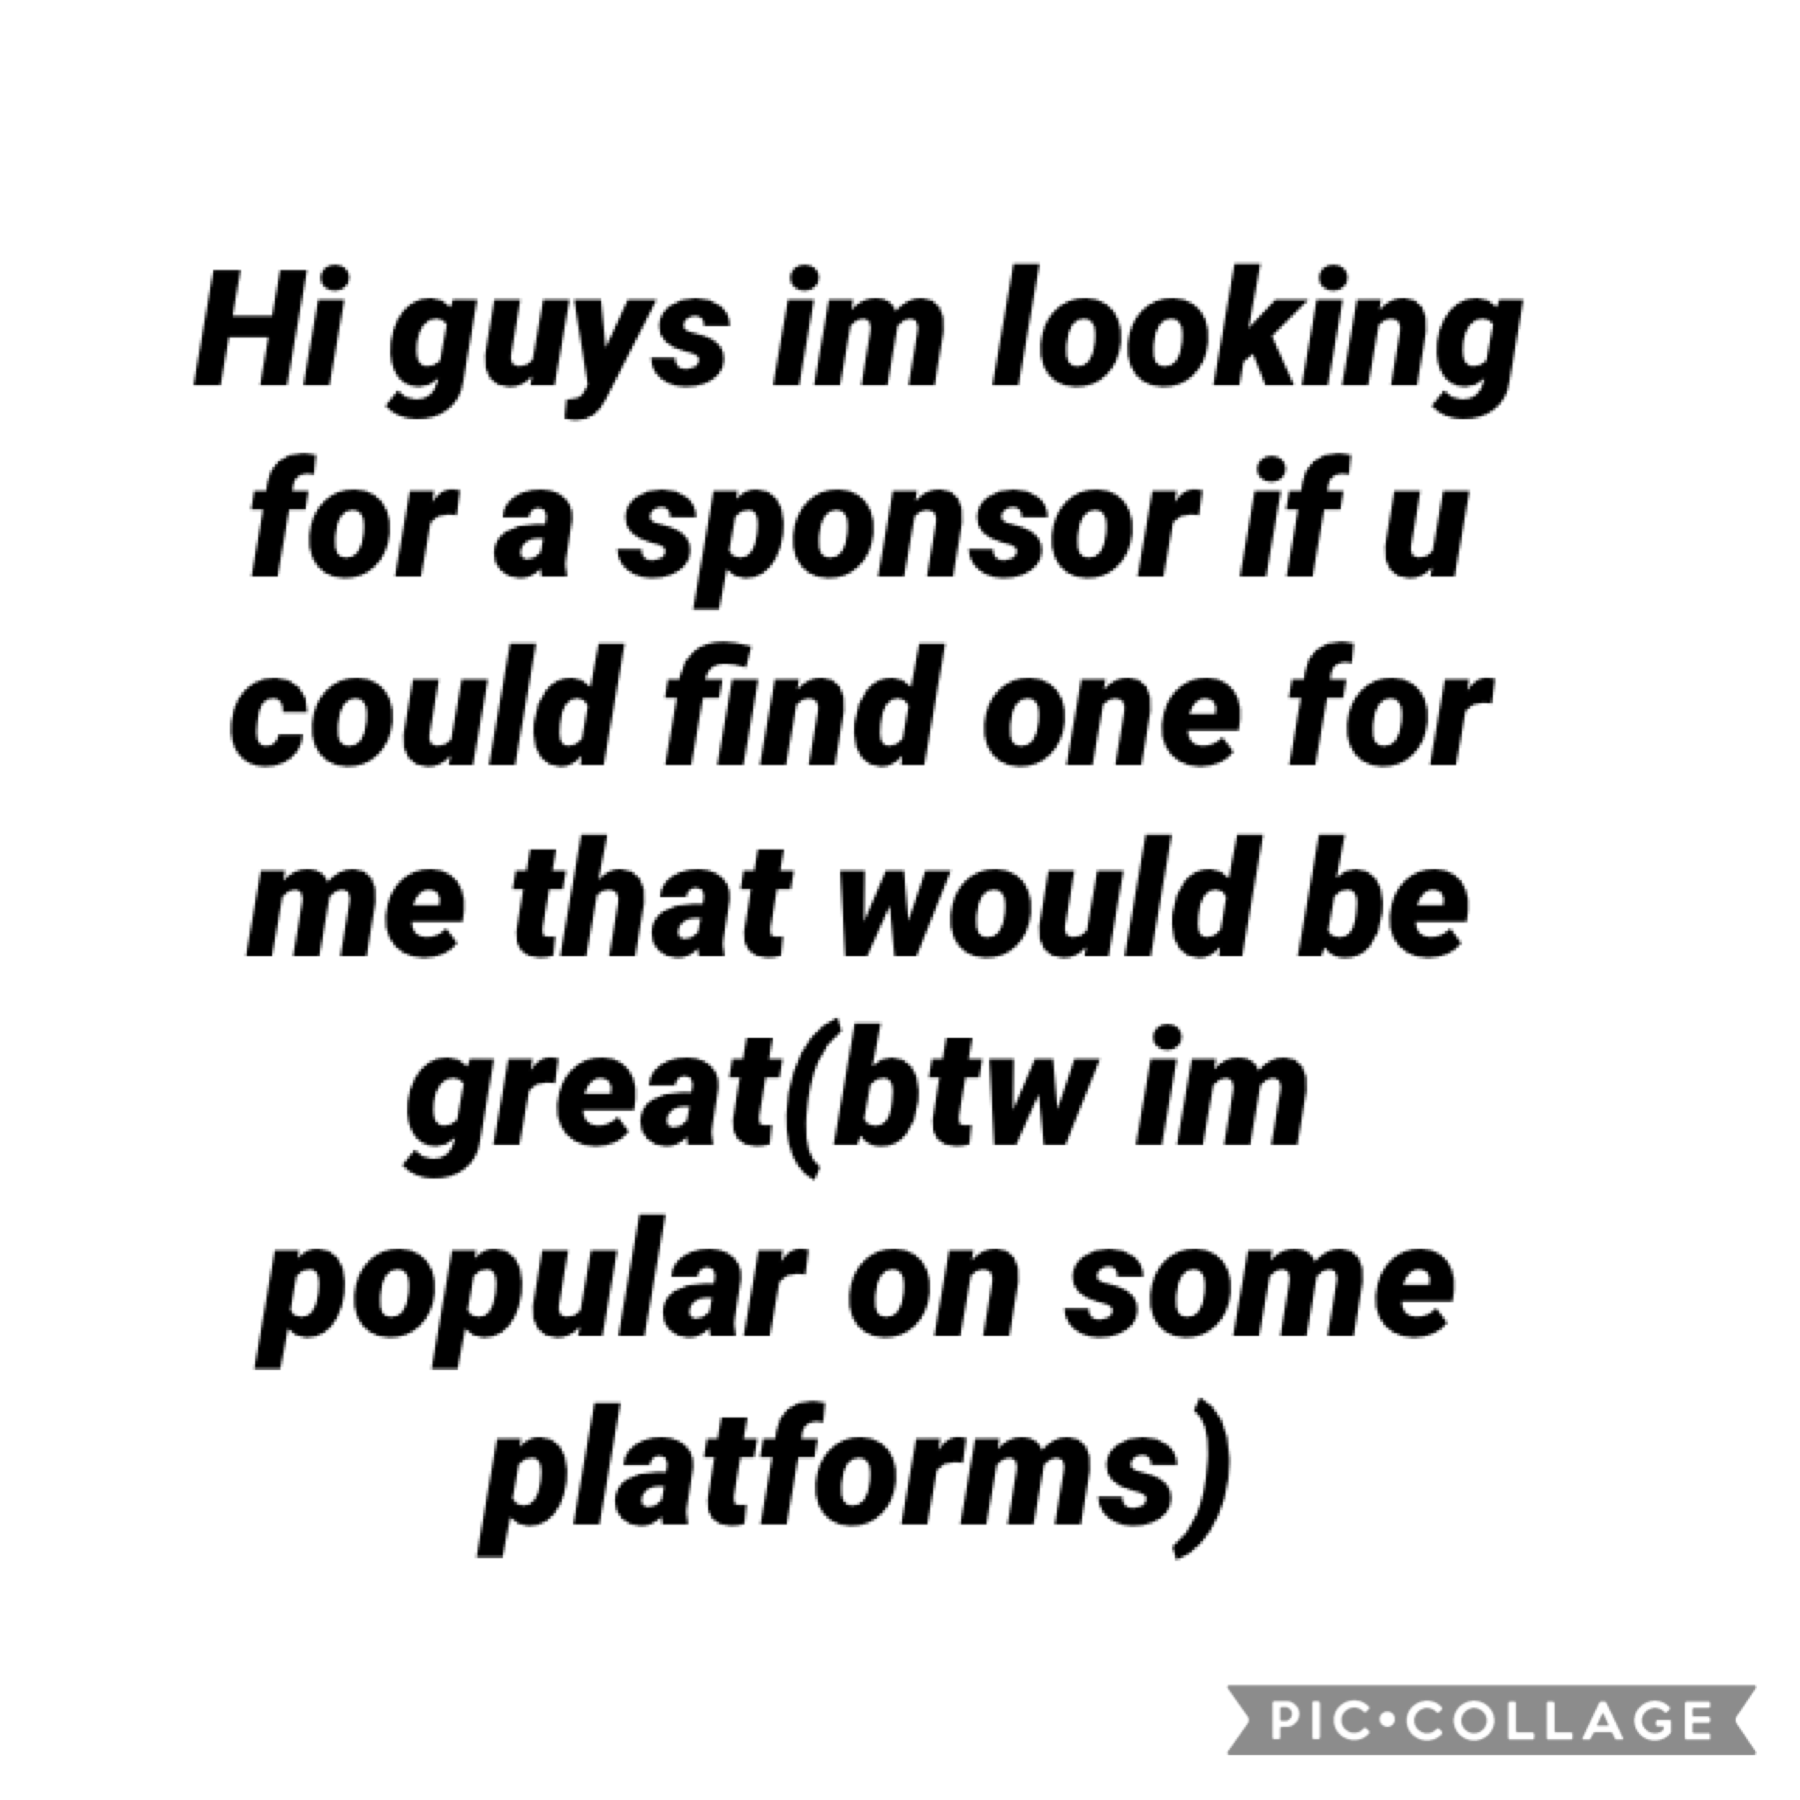 Looking for sponsors